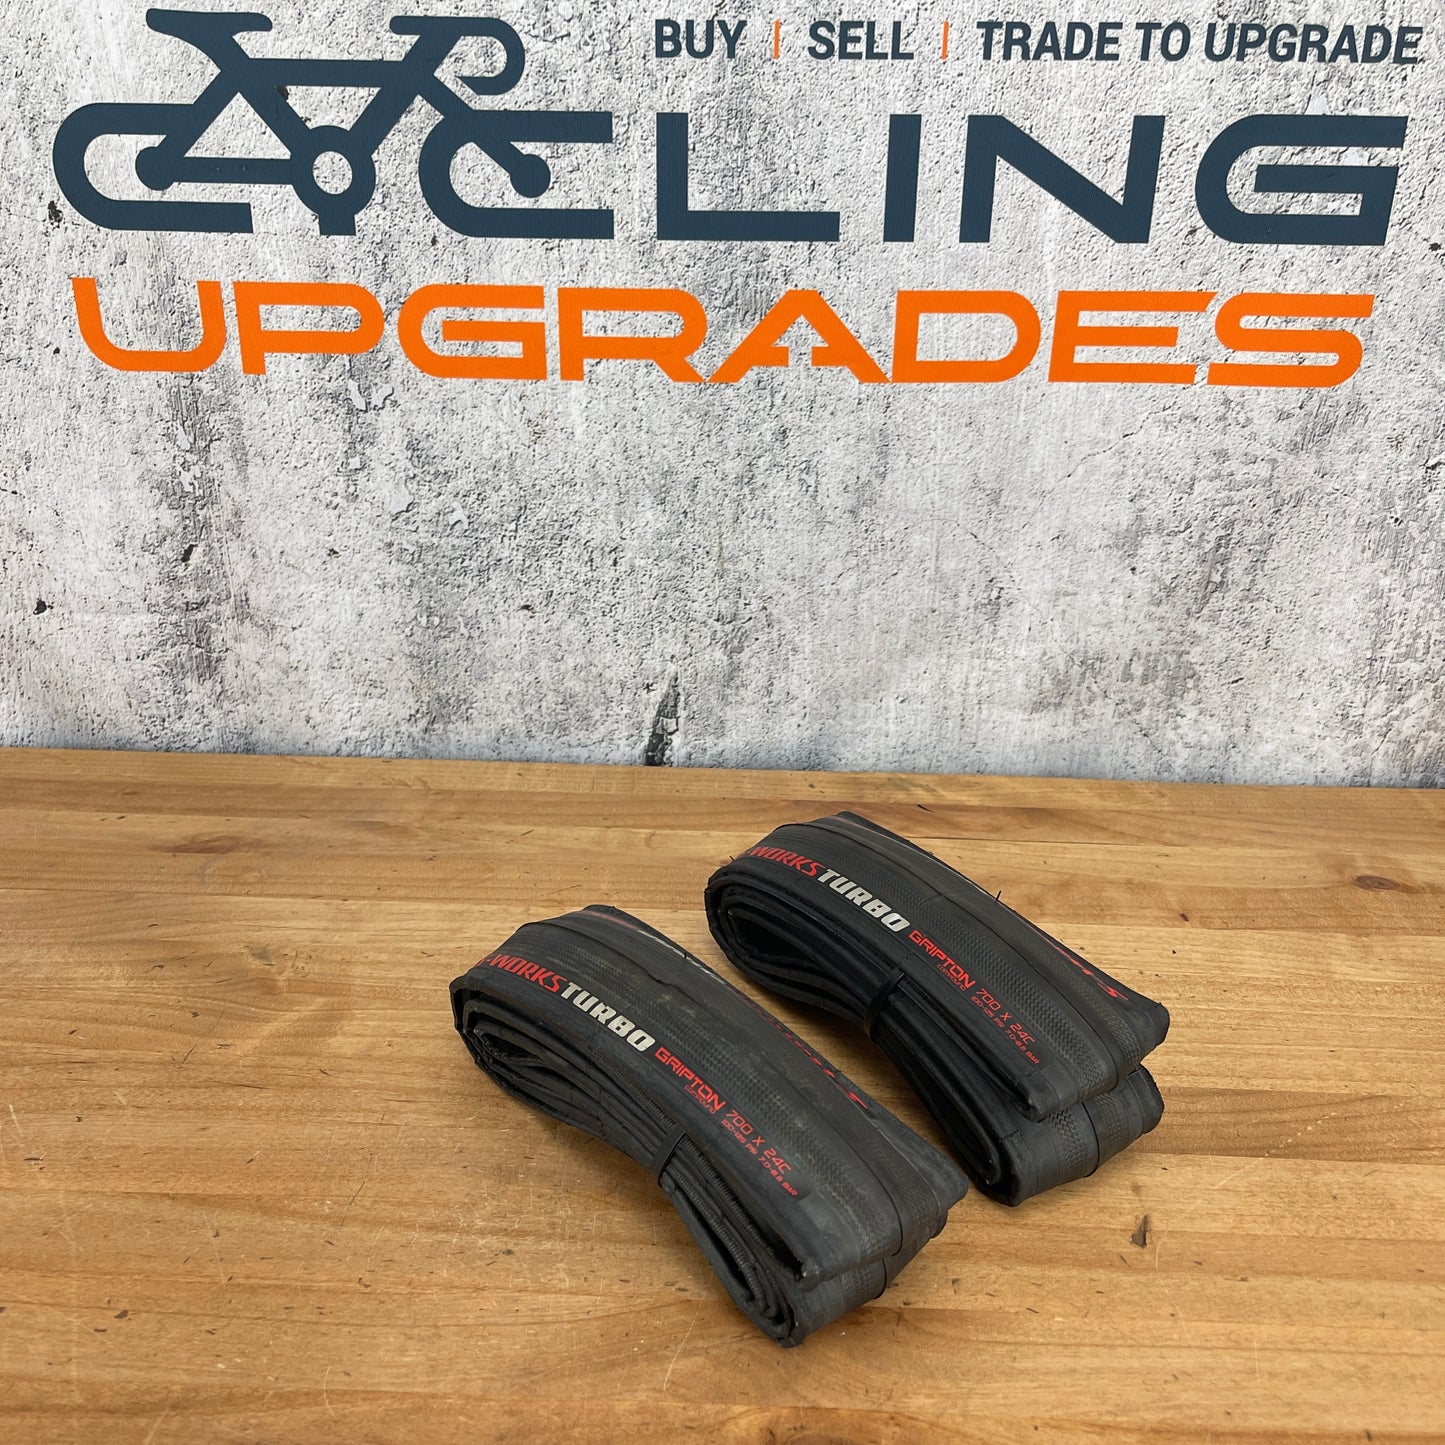 New! Pair Specialized S-Works Turbo Gripton 700c x 24mm Clincher Road Bike Tires